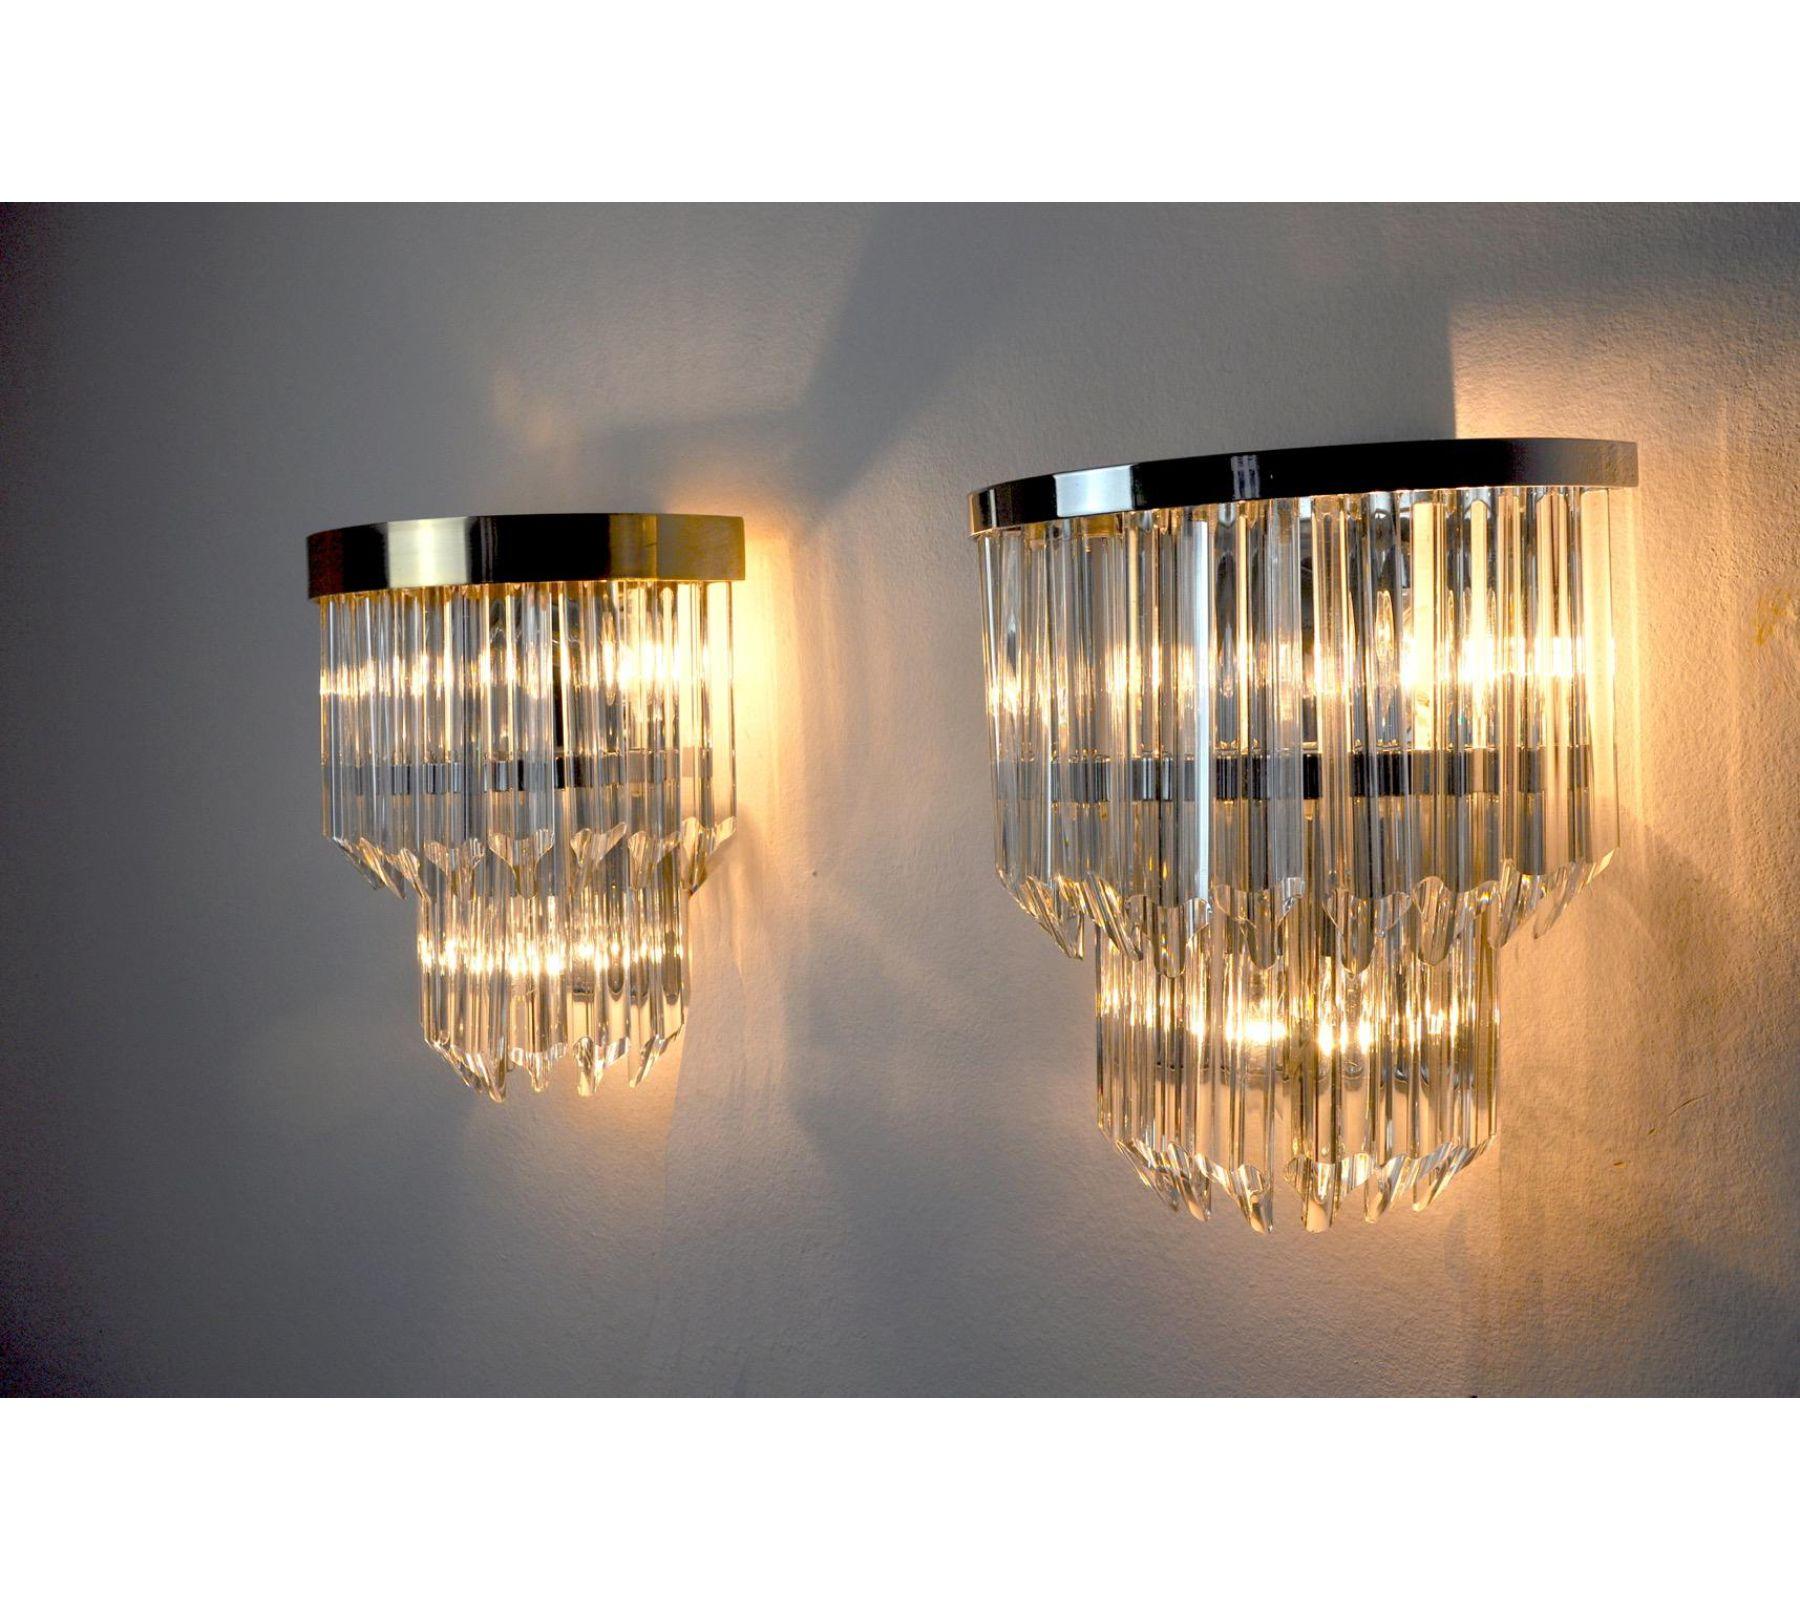 Crystal 1970s Paolo Venini Chrome and Glass Sconces, Italy, a Pair For Sale